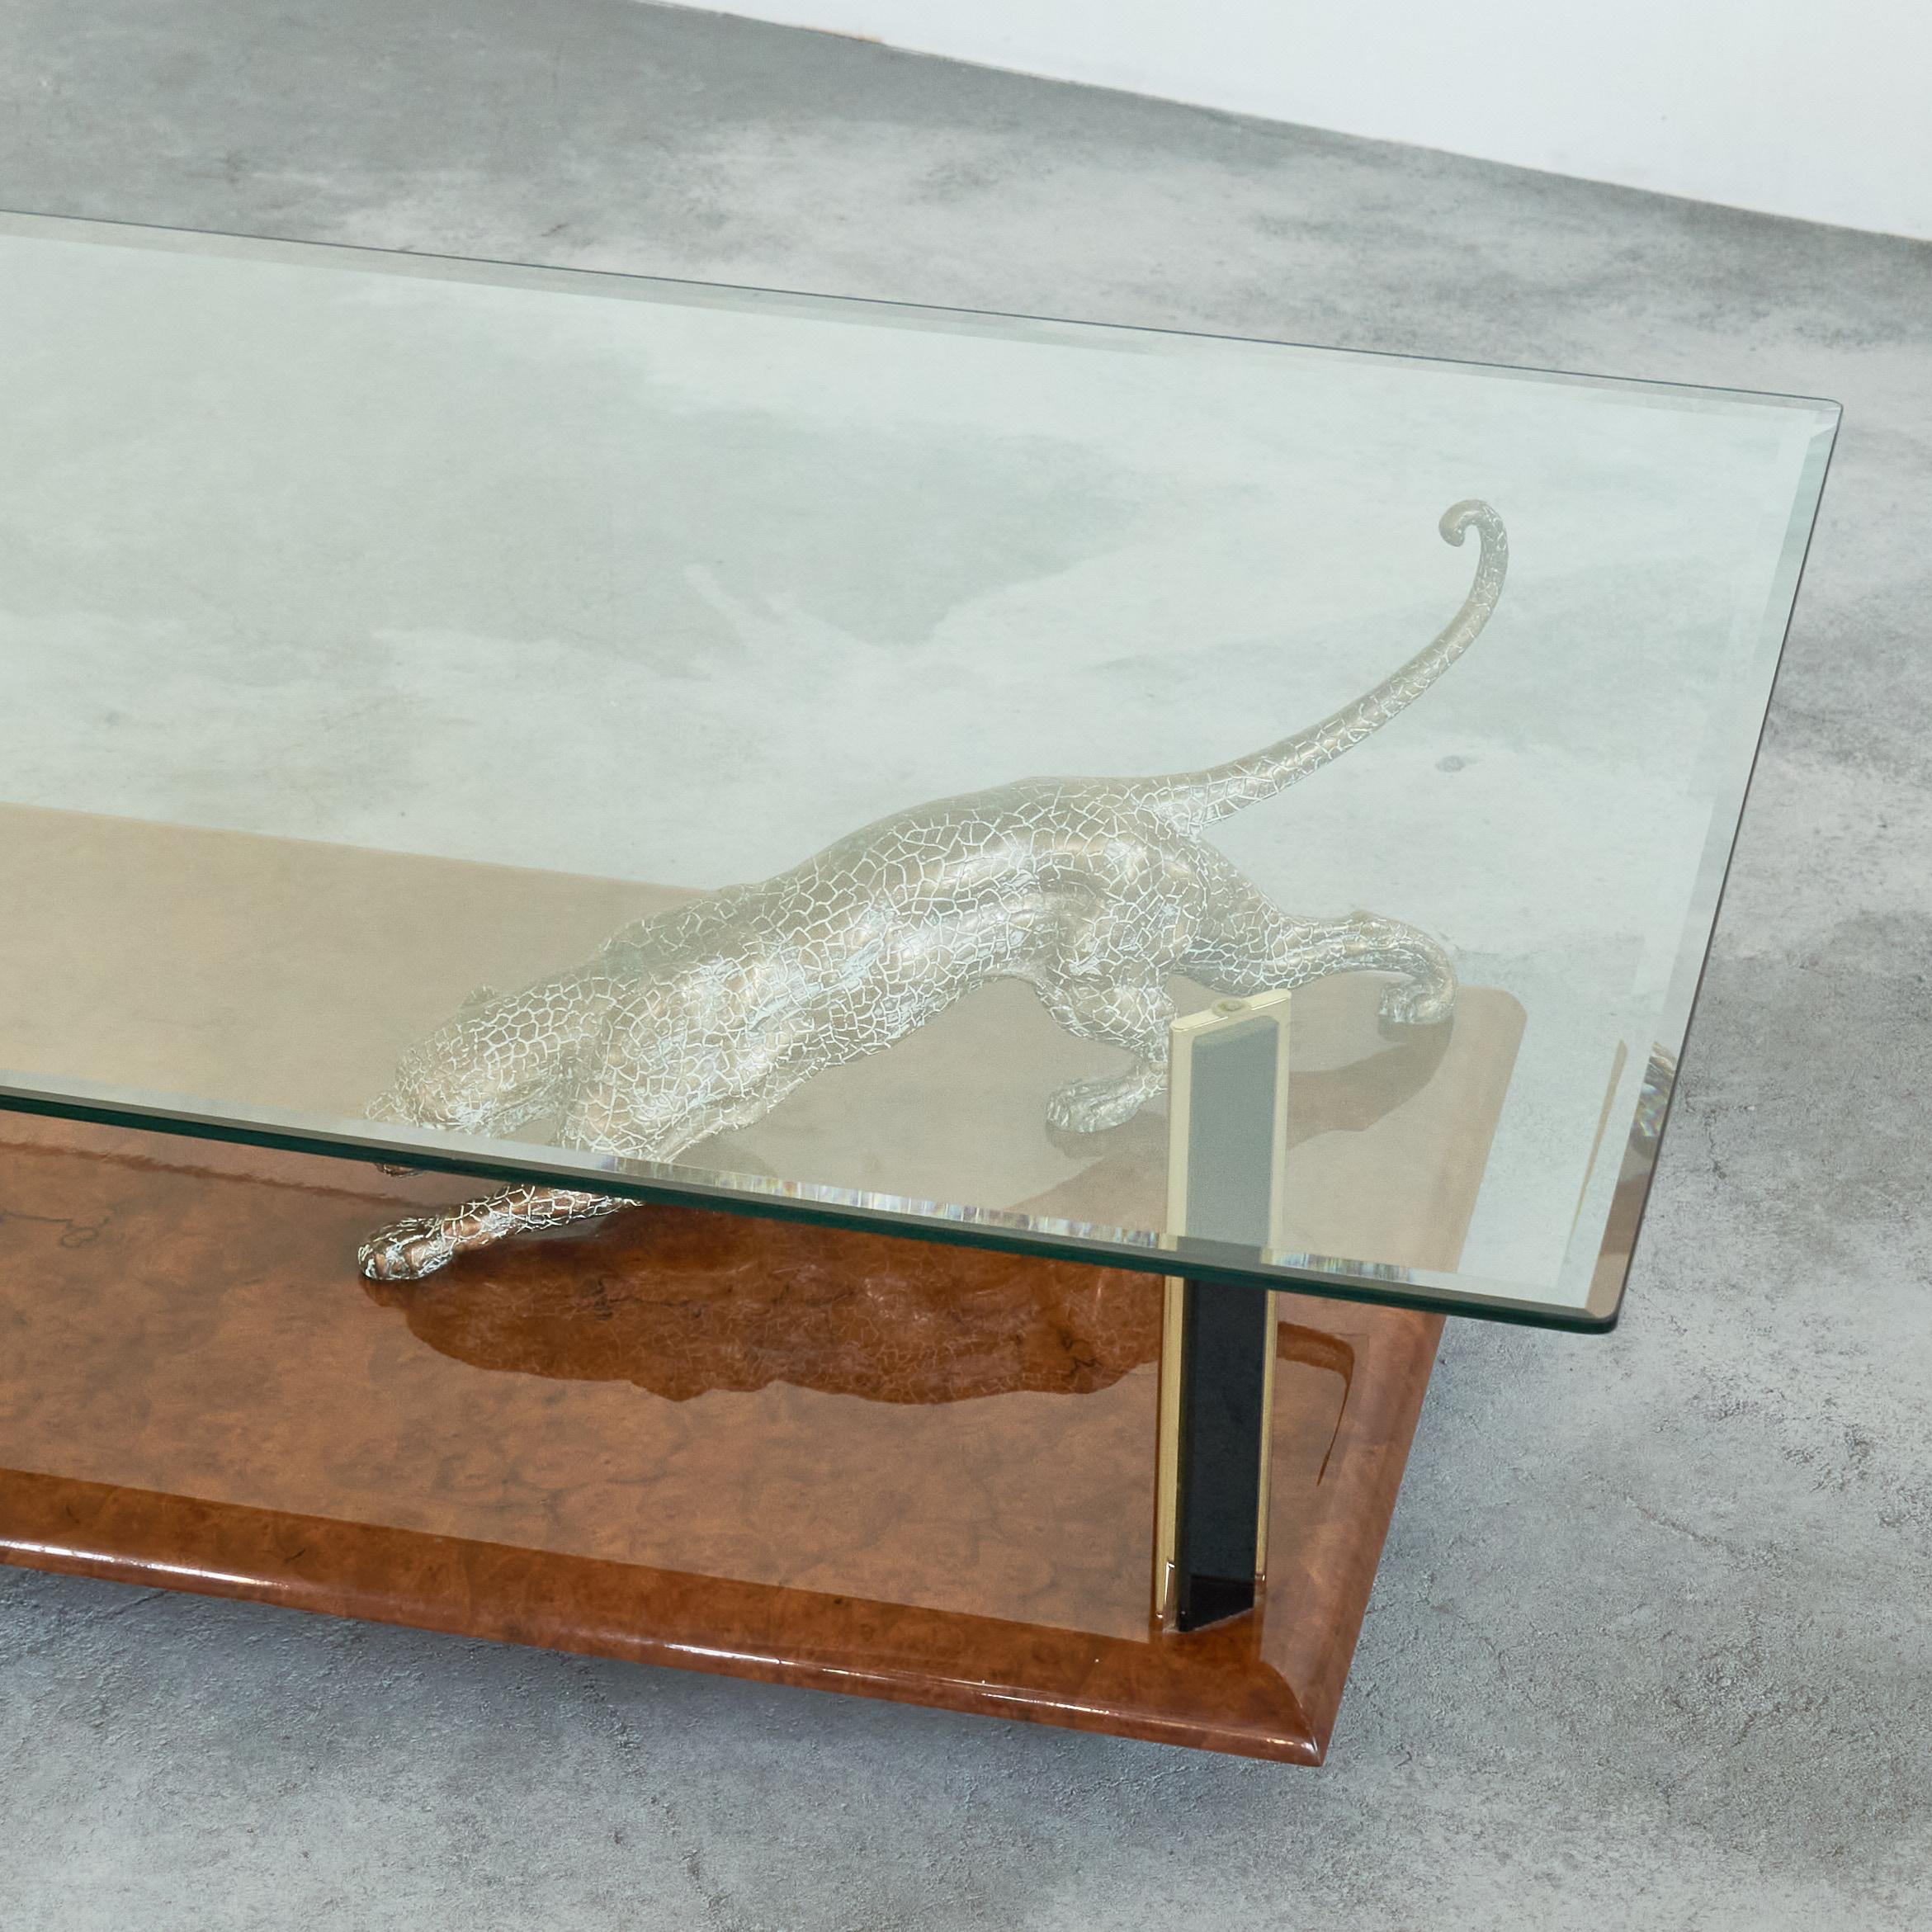 Hand-Crafted Nicola Voci 'Jaguar' Coffee Table in Bronze, Burl Wood and Beveled Glass 1970s For Sale